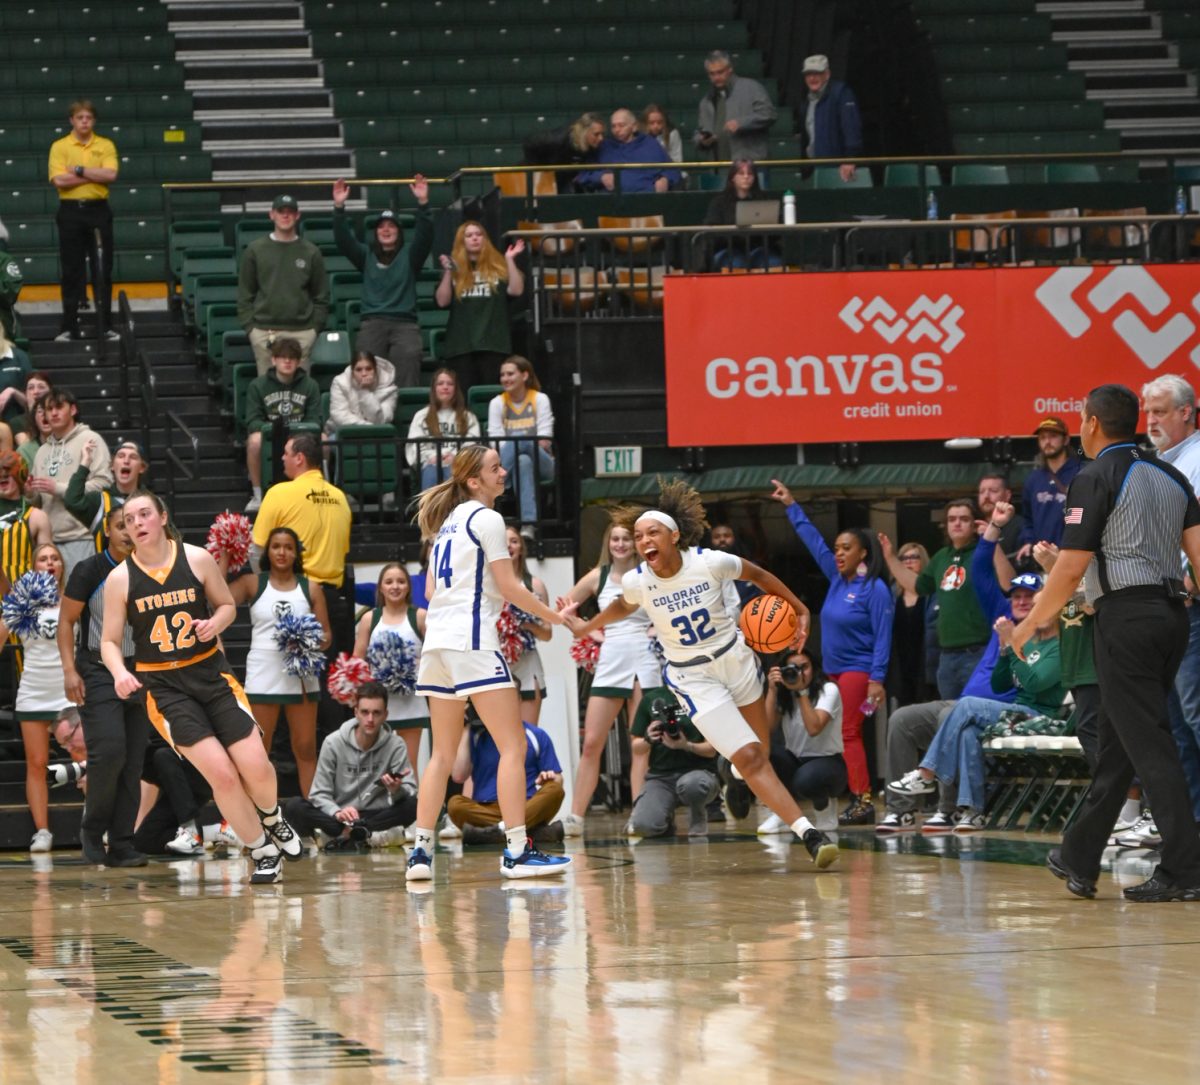 Cailyn Crocker gains possession of the ball during the Colorado State University basketball game against the University of Wyoming Feb. 17. CSU won 75-70.